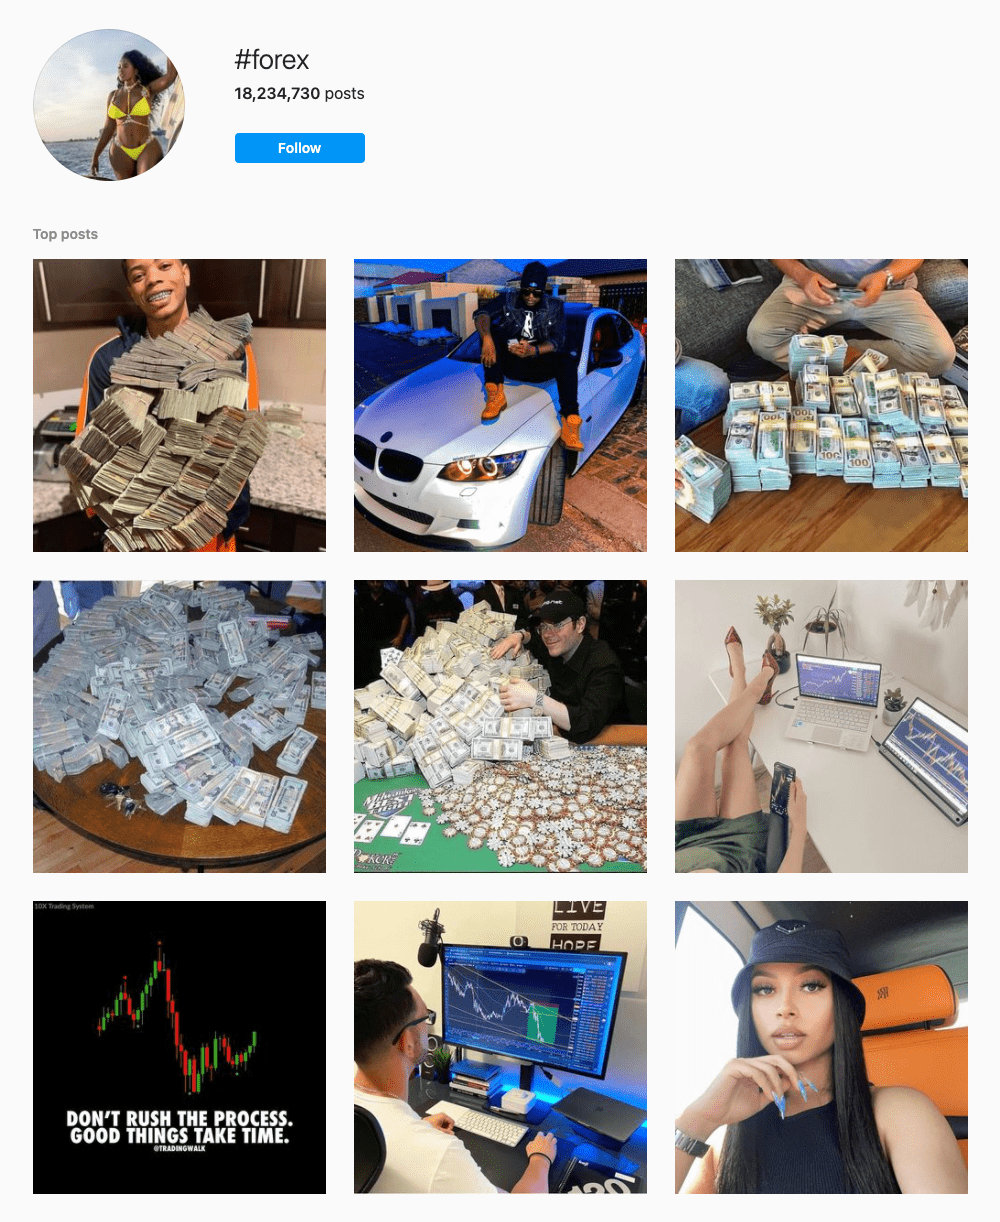 #forex Hashtags for Instagram